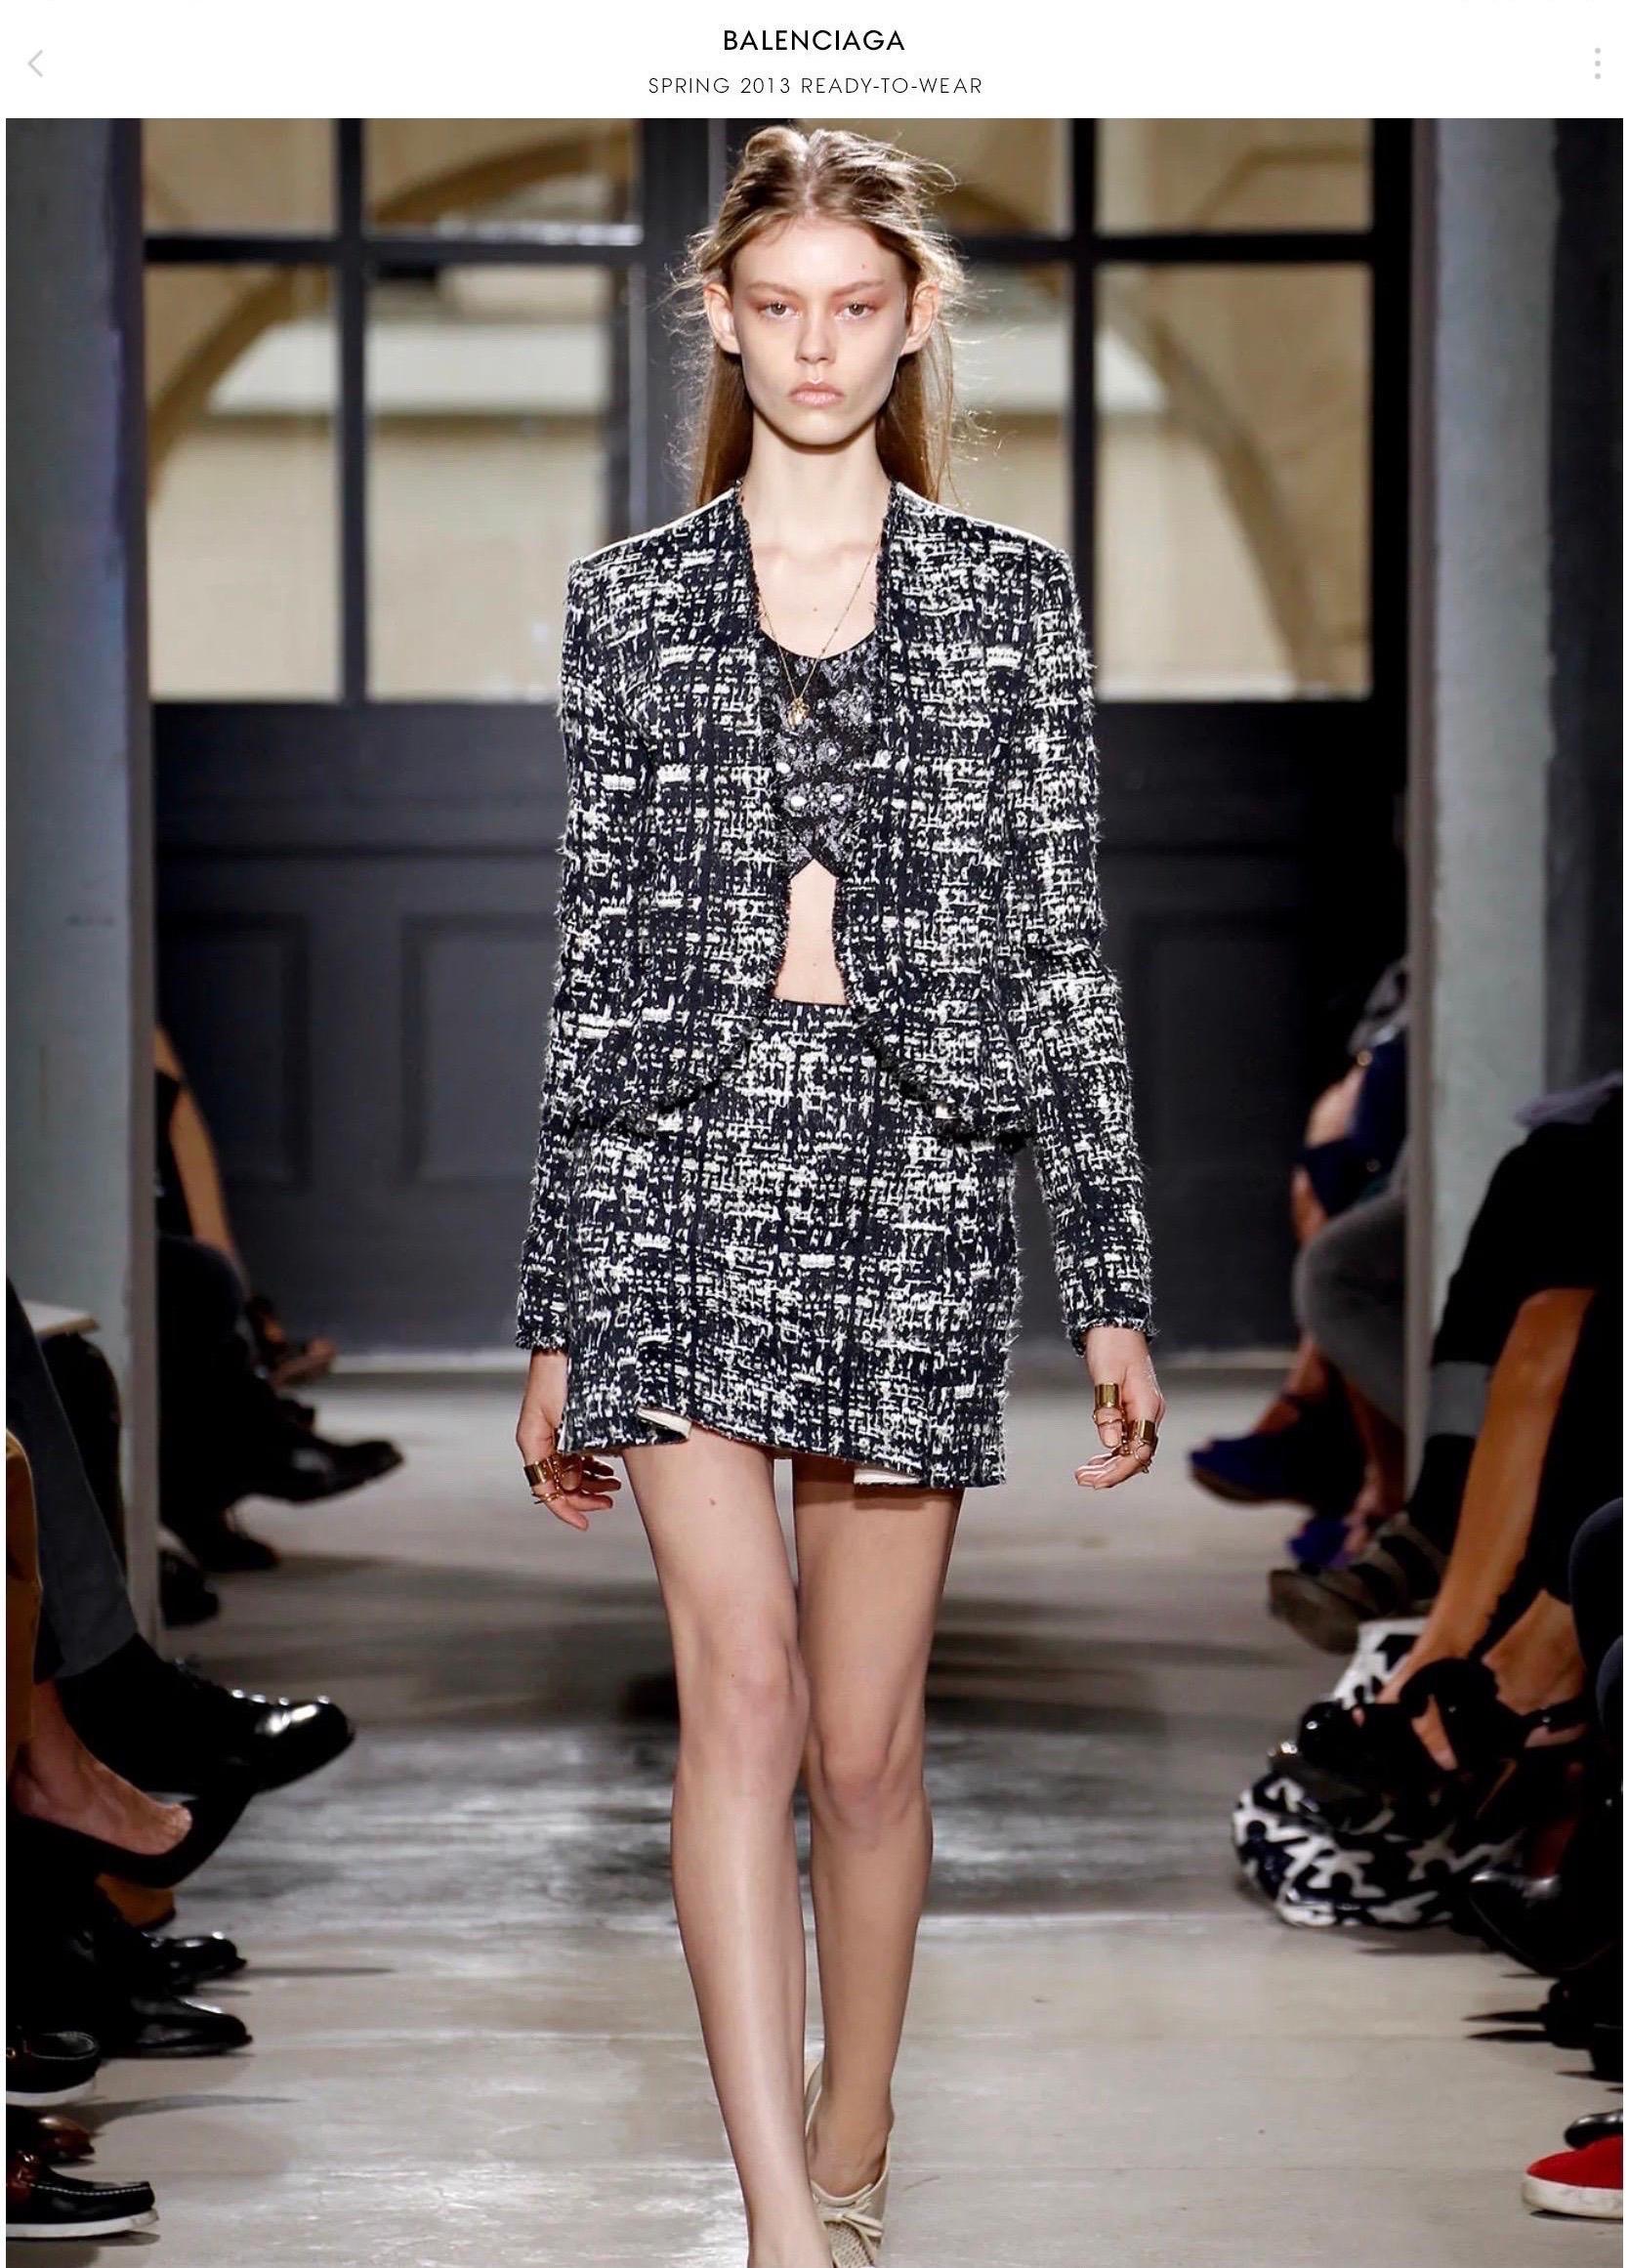 Balenciaga SS 13 Jacket and Skirt Suit For Sale 7